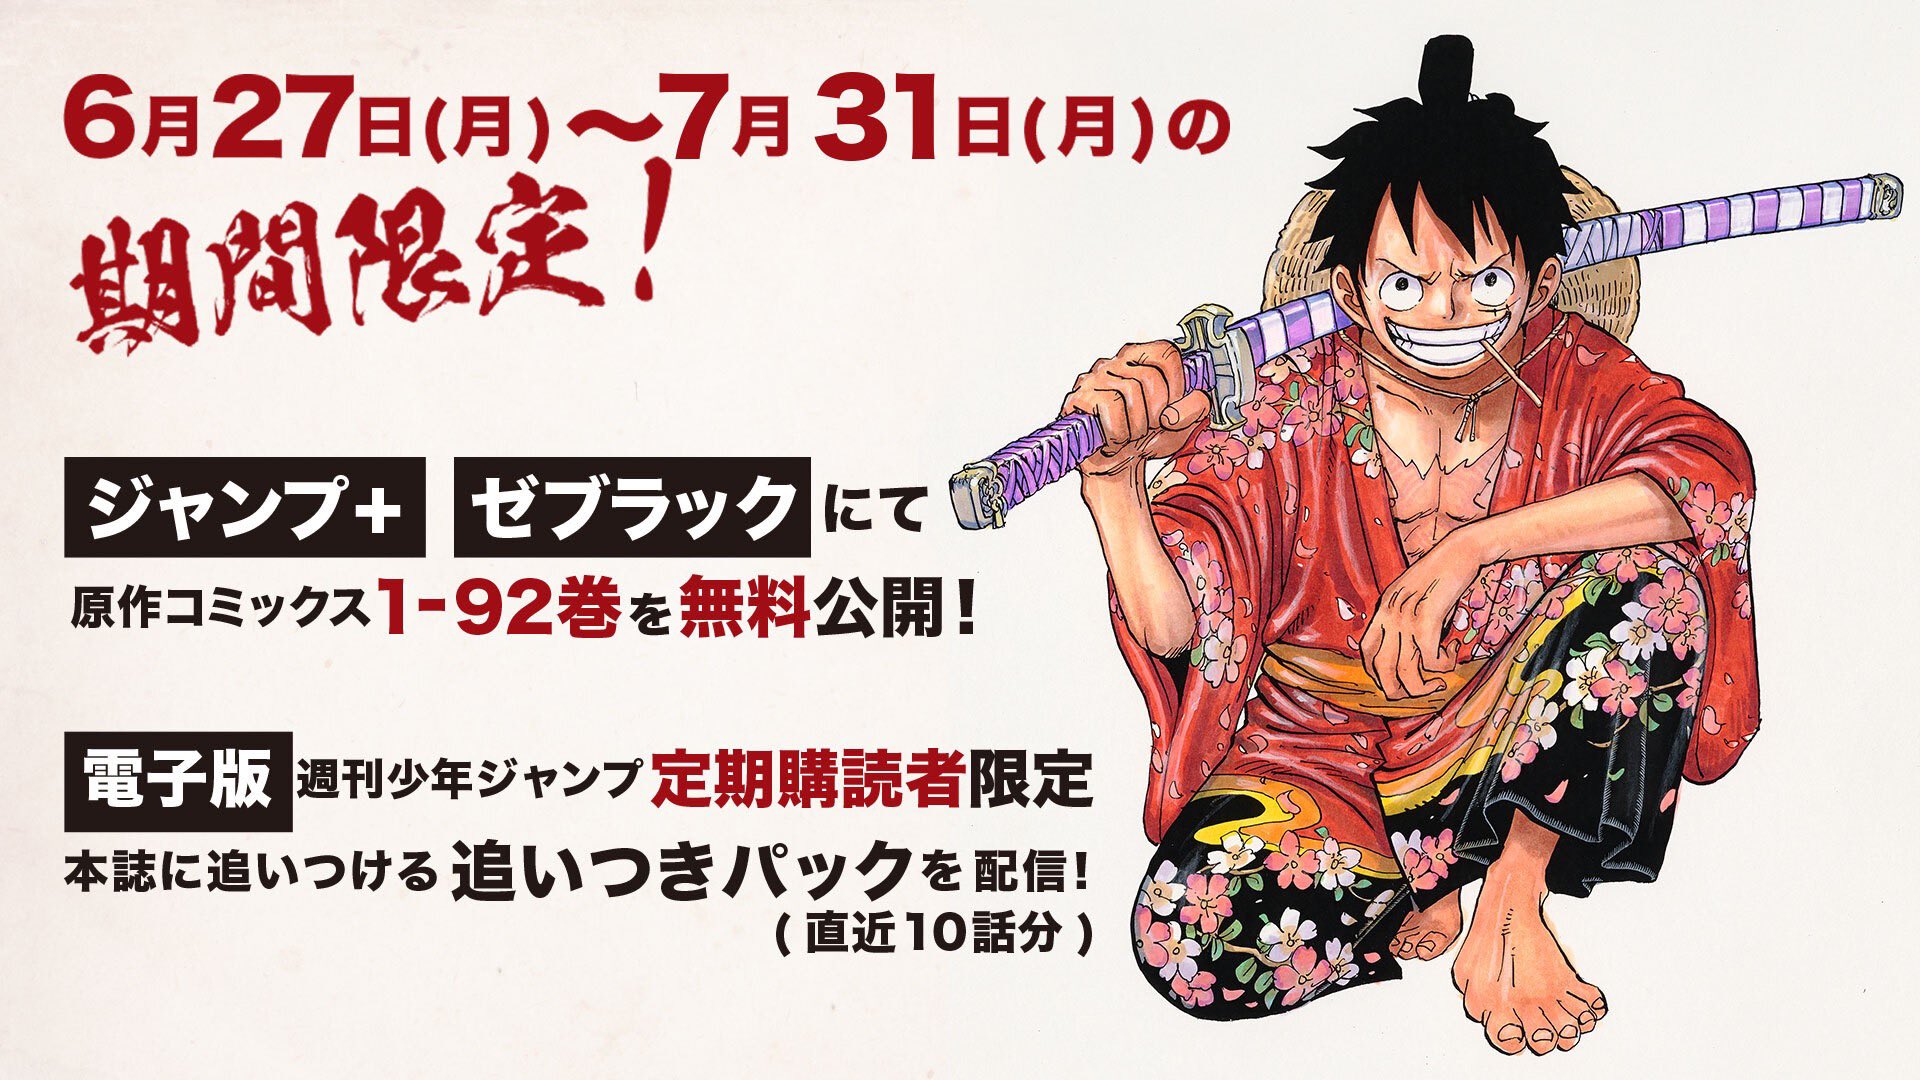 ONE PIECE」の原作コミックス92巻分が本日6月27日より無料公開！ - GAME Watch